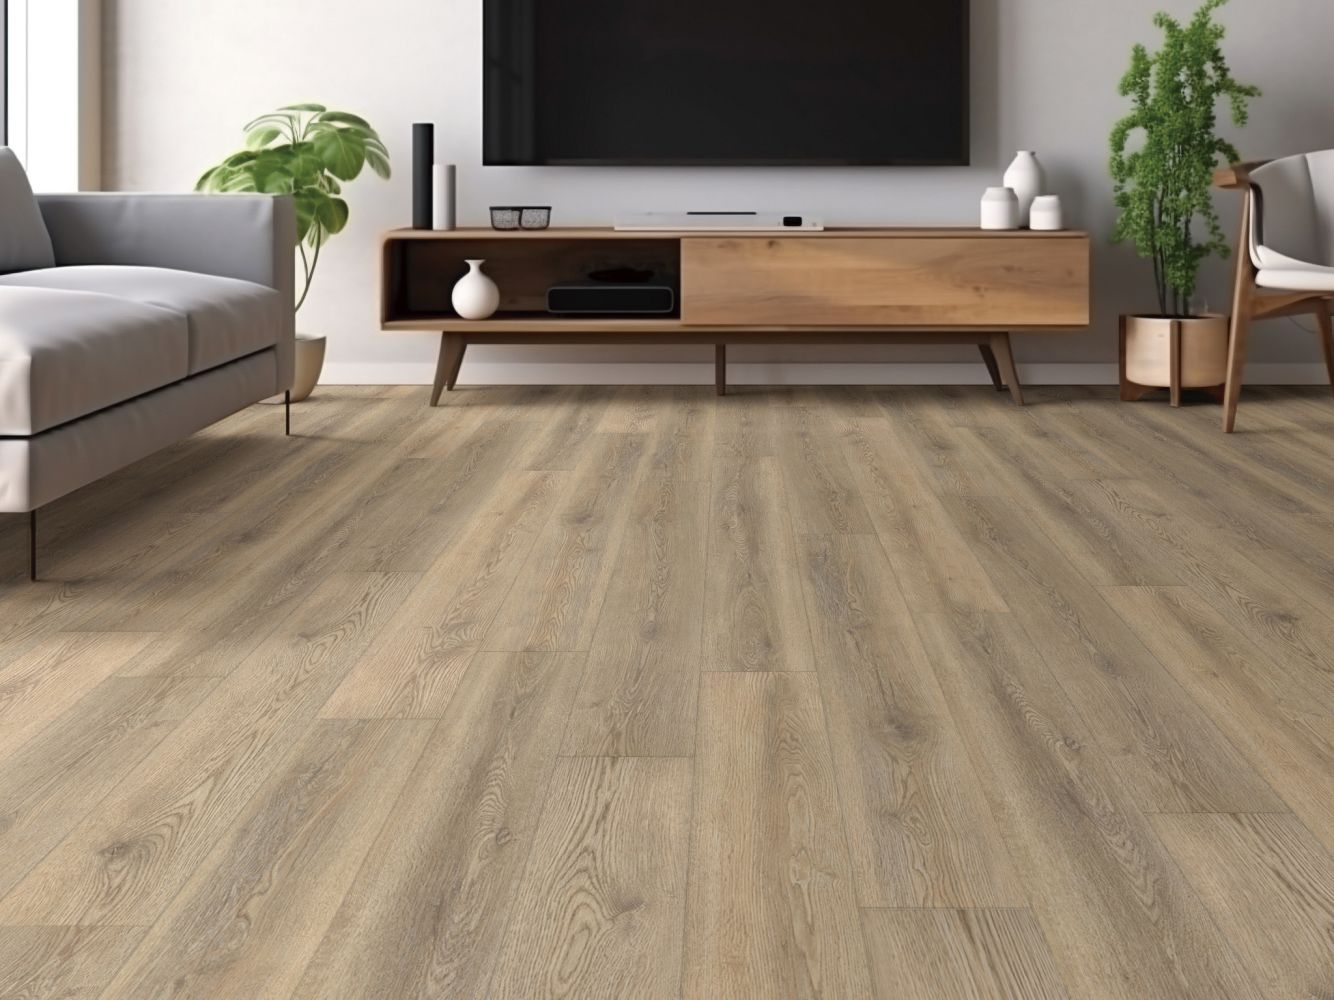 Shaw Floors Resilient Residential Pantheon HD Plus Tostata 02102_2001V